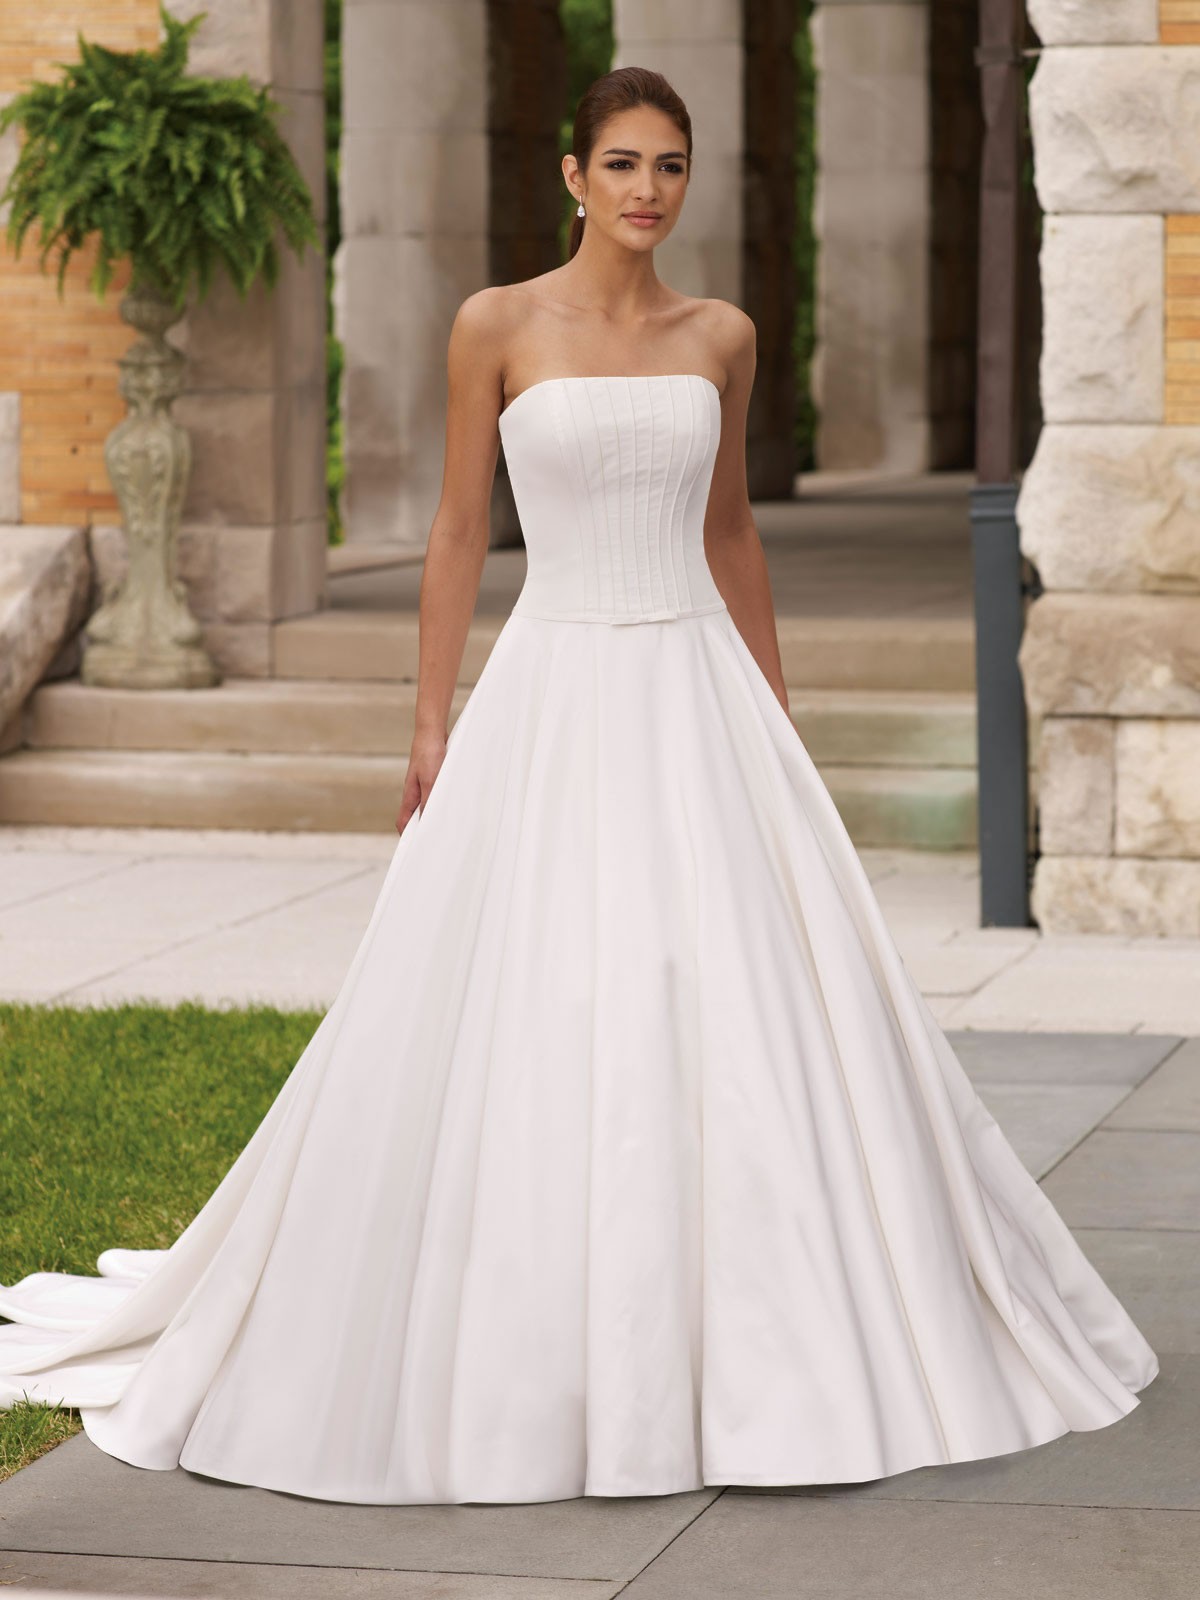 Taffeta Strapless Finely pin tucked Bodice Ball Gown Wedding Dress